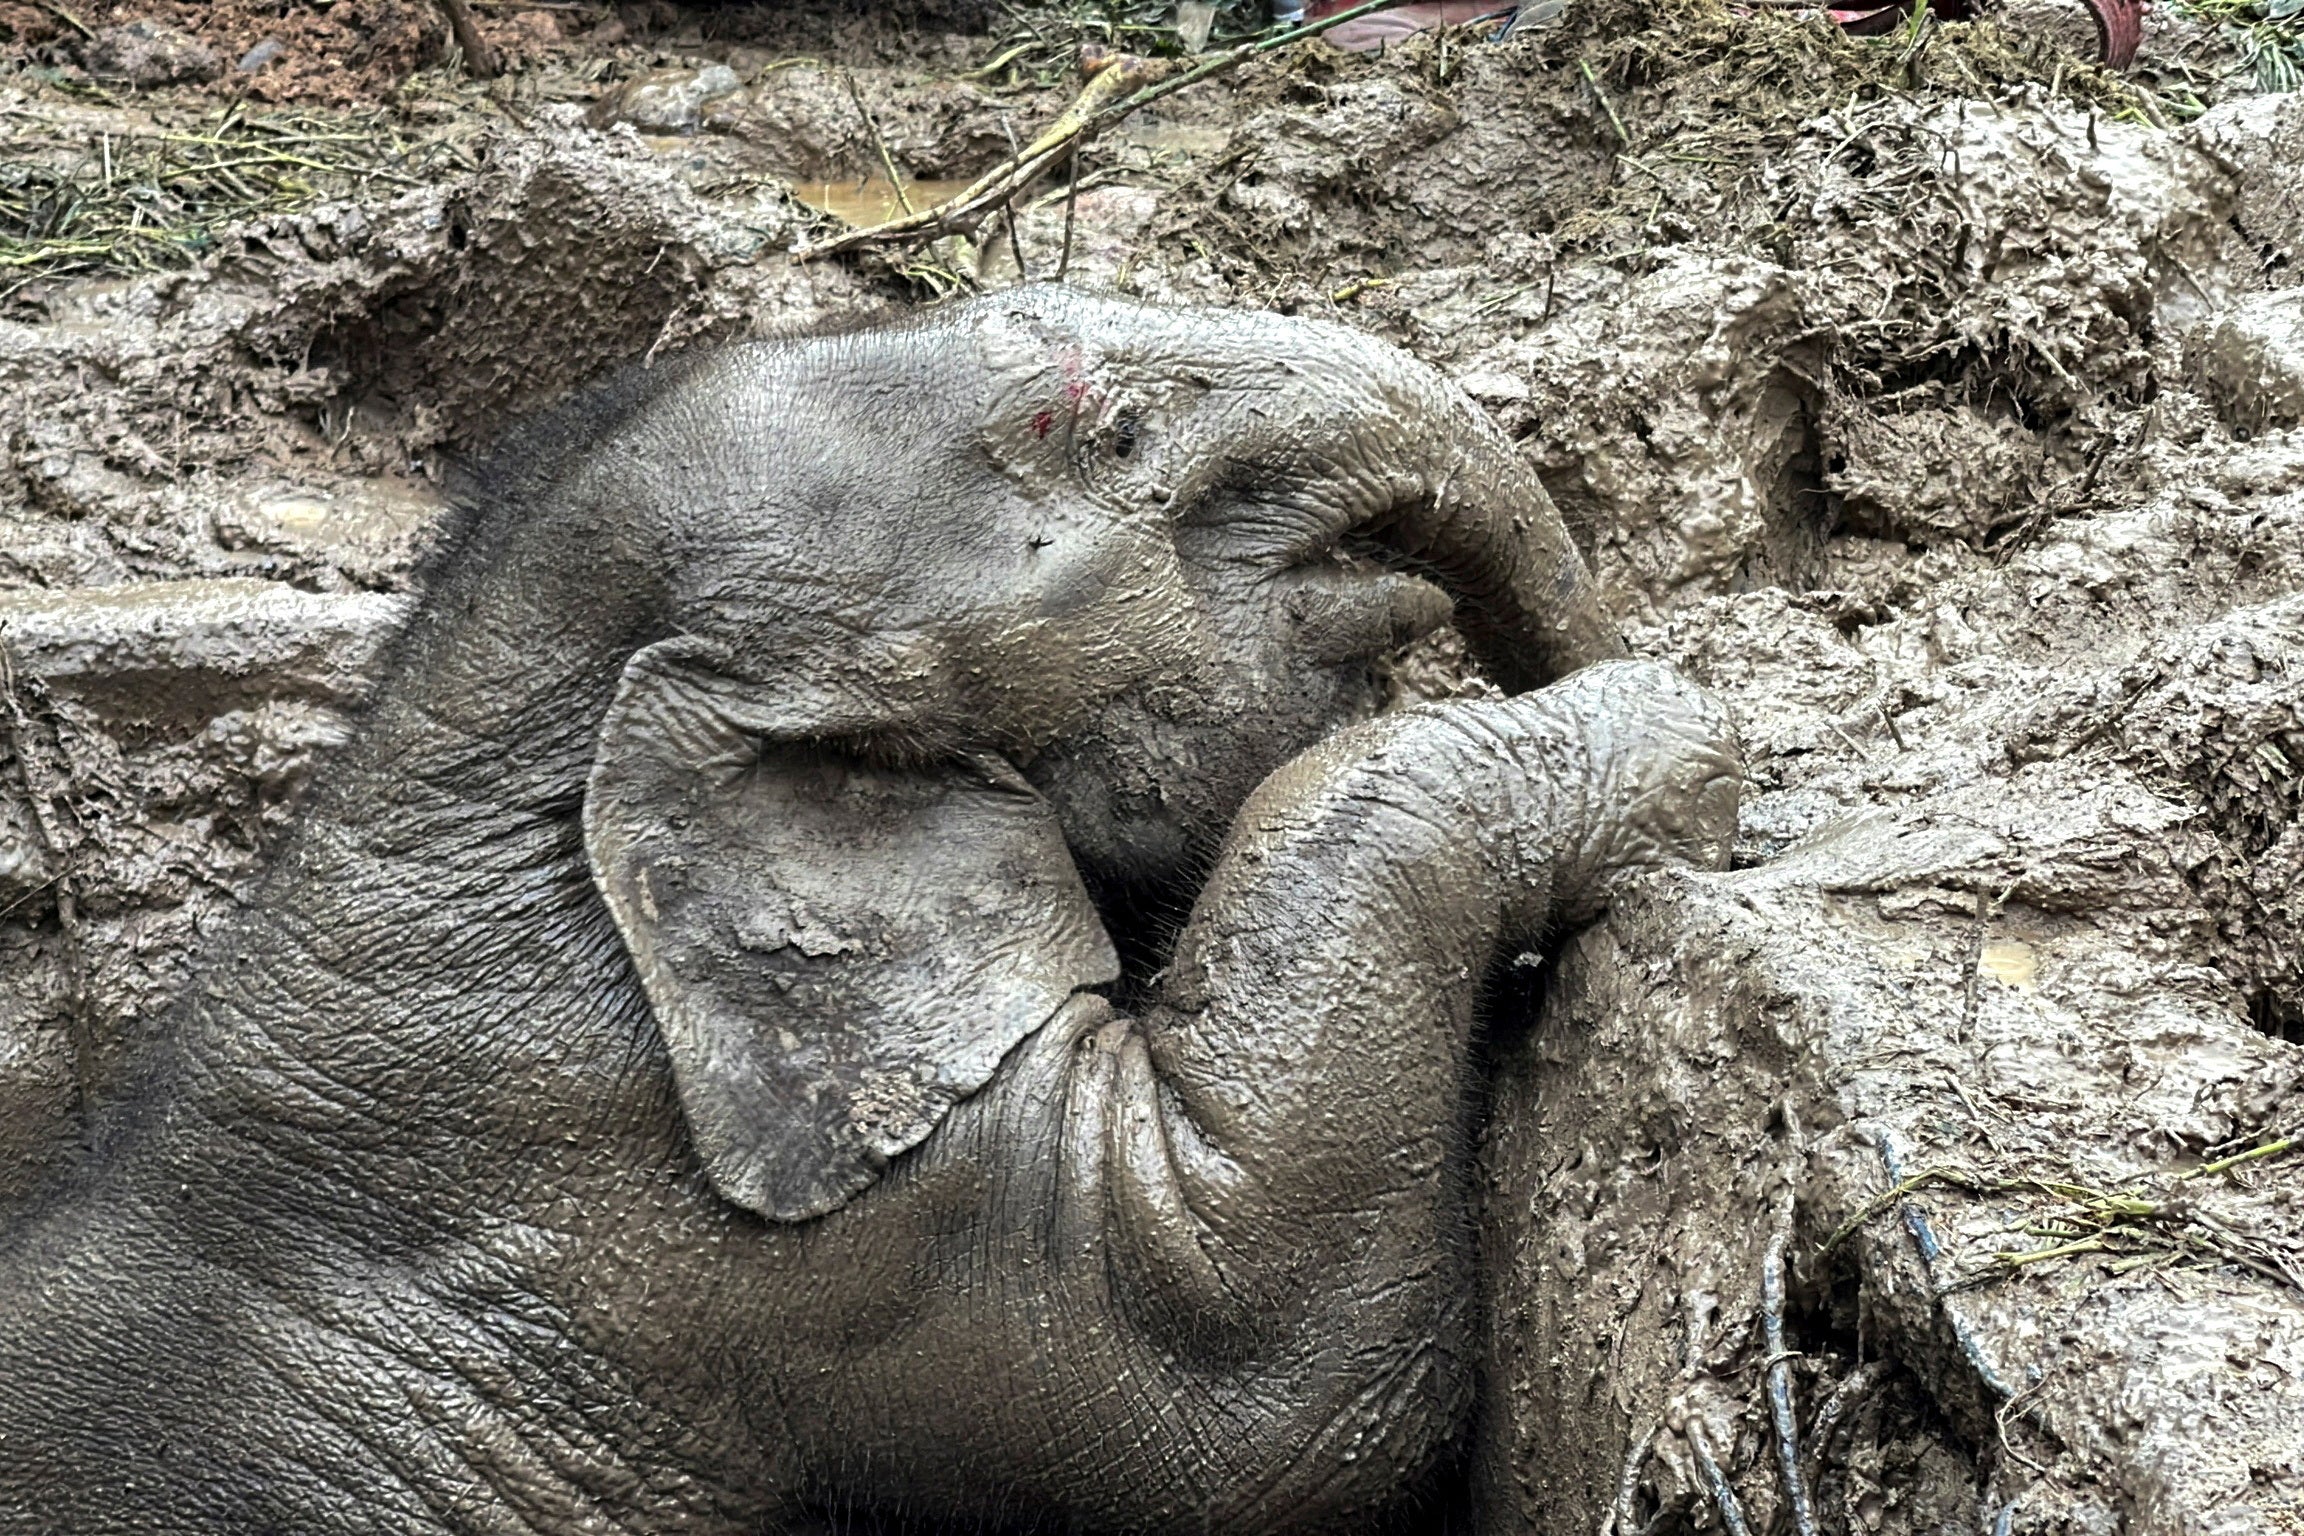 An elephant calf is seen inside a drainage hole after it fell in in Khao Yai National Park, Nakhon Nayok province, Thailand on 13 July